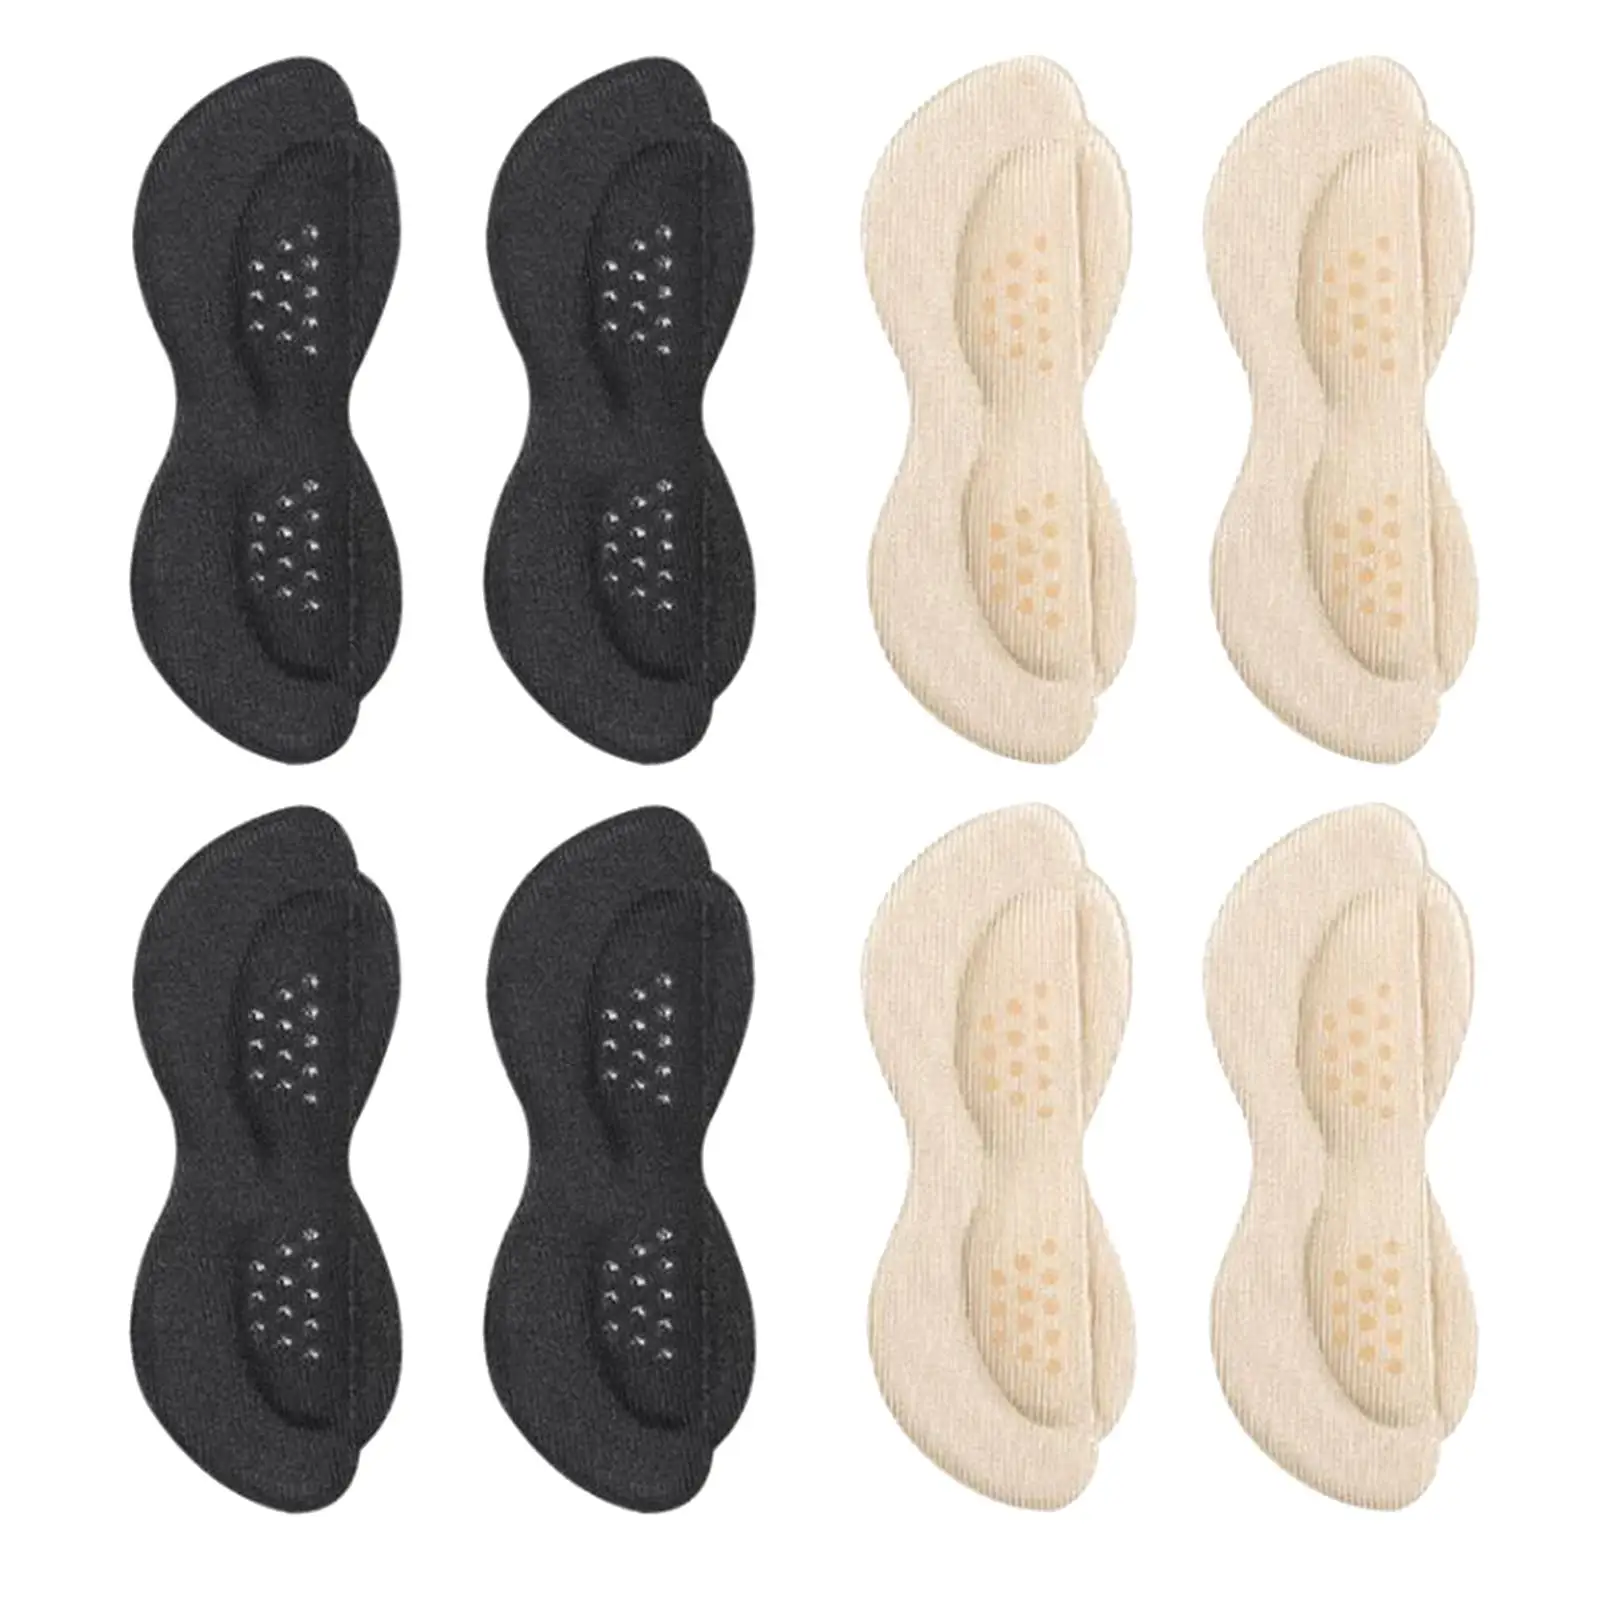 Shoes Heel Protectors Anti-Wear Self-Adhesive Heel Cups for Foot Pain Relieving Adults Men Women